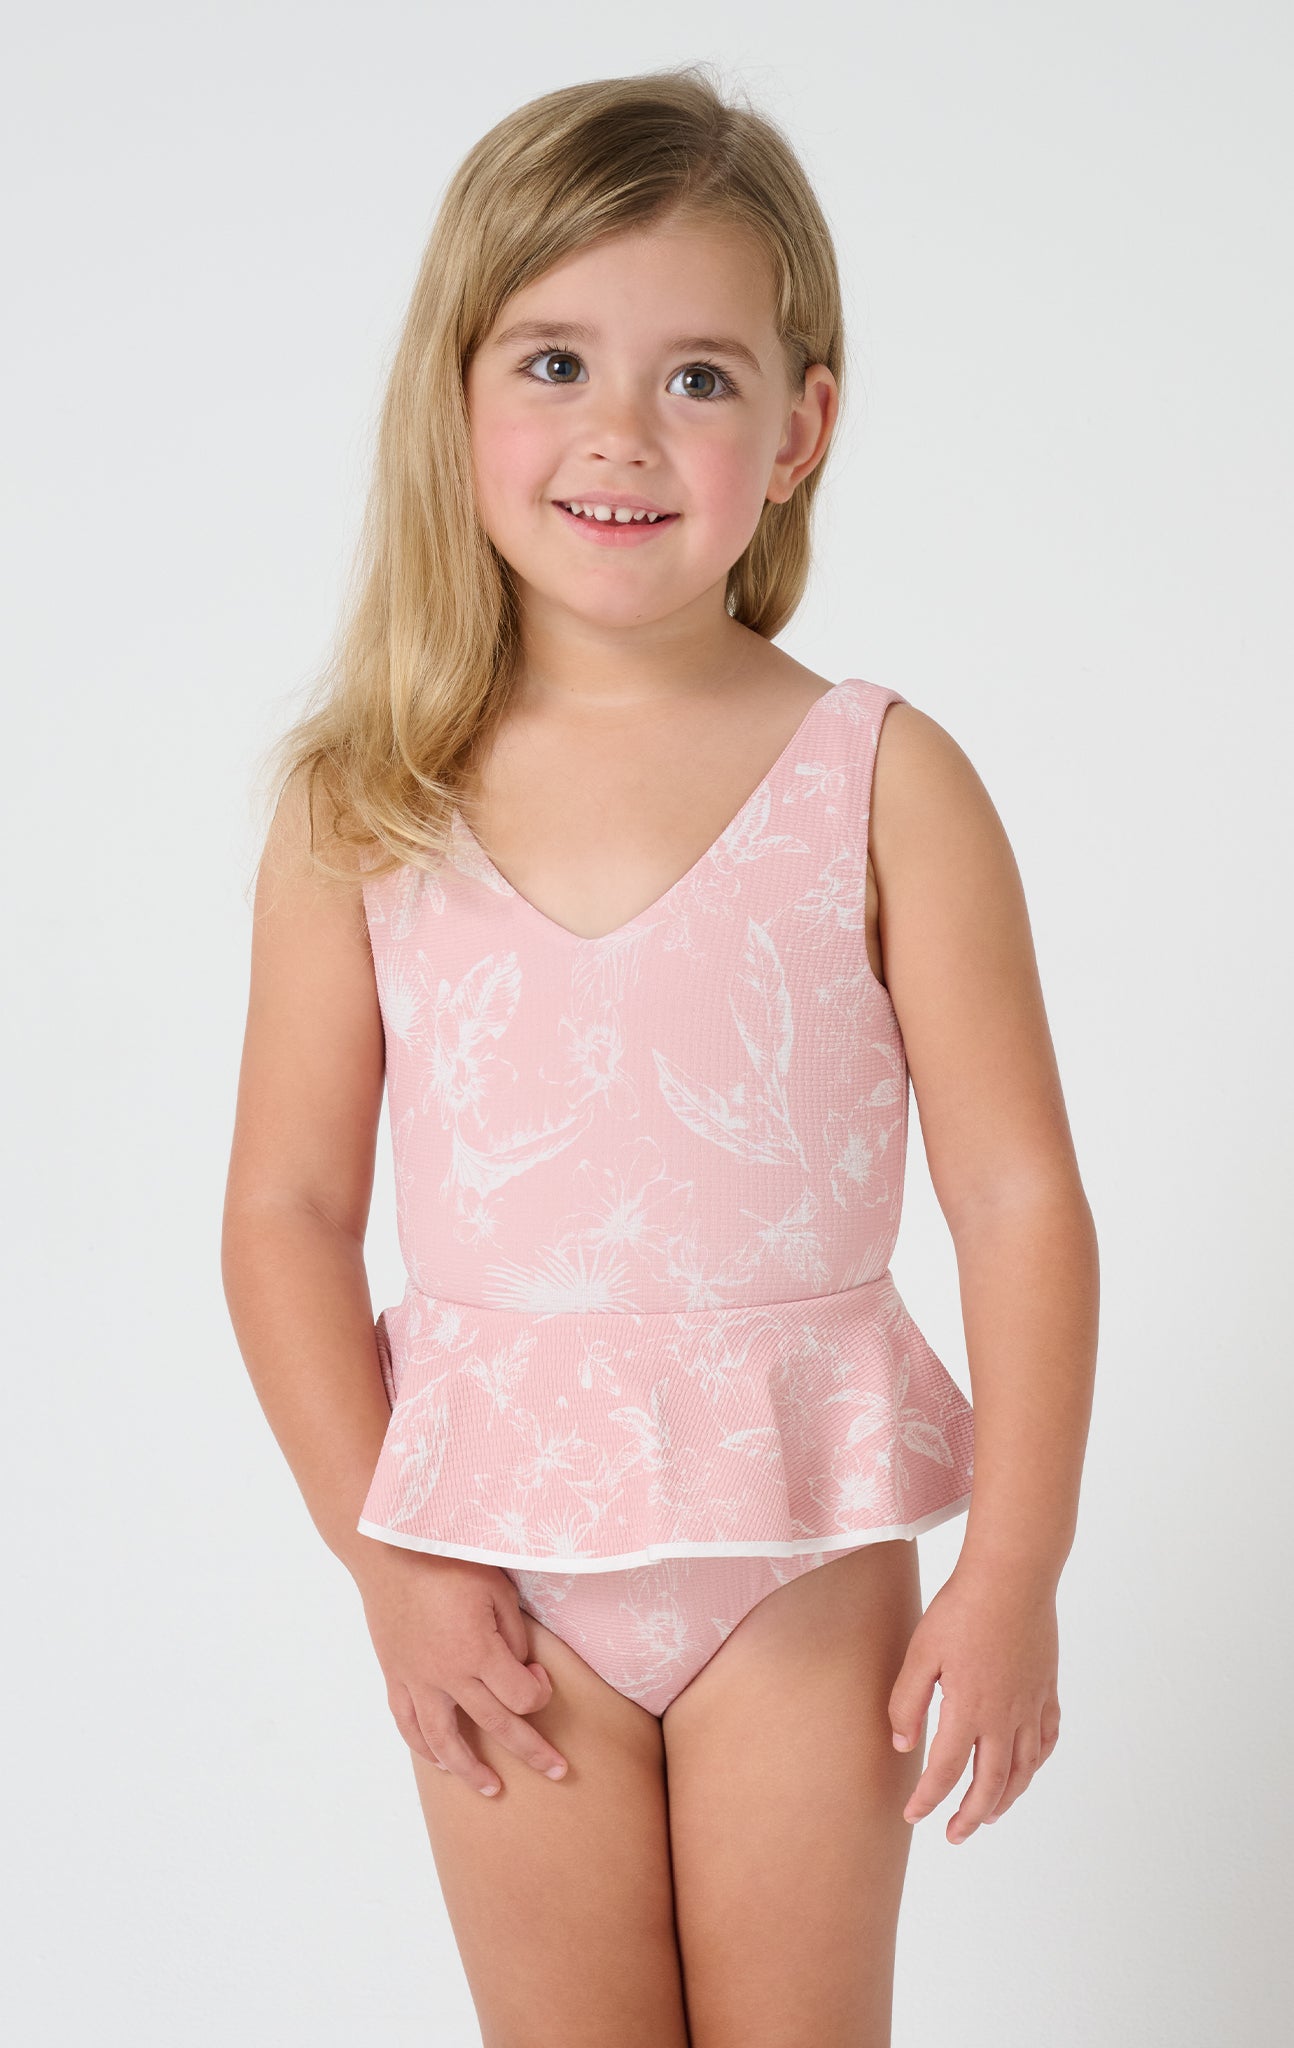 Bumby Piping Gramercy Maillot in Calm Floral Print MARYSIA